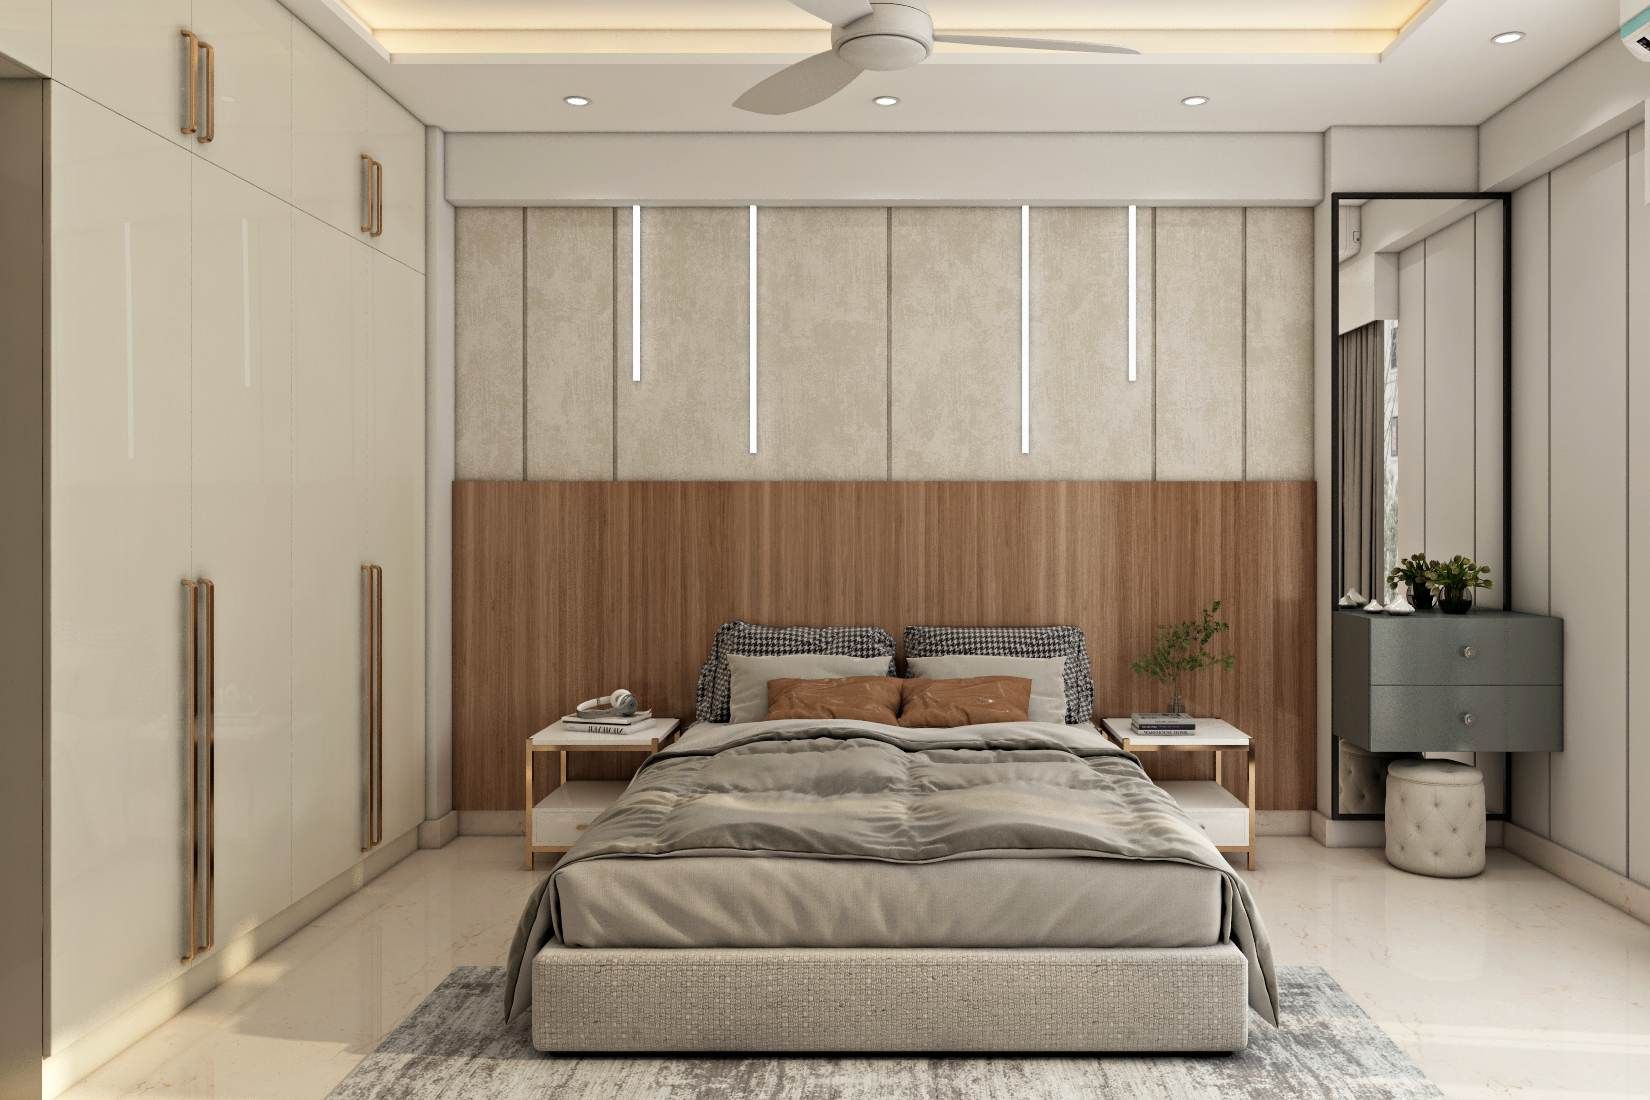 Spacious Bedroom Design With A Floor-To-Ceiling Wardrobe And A ...